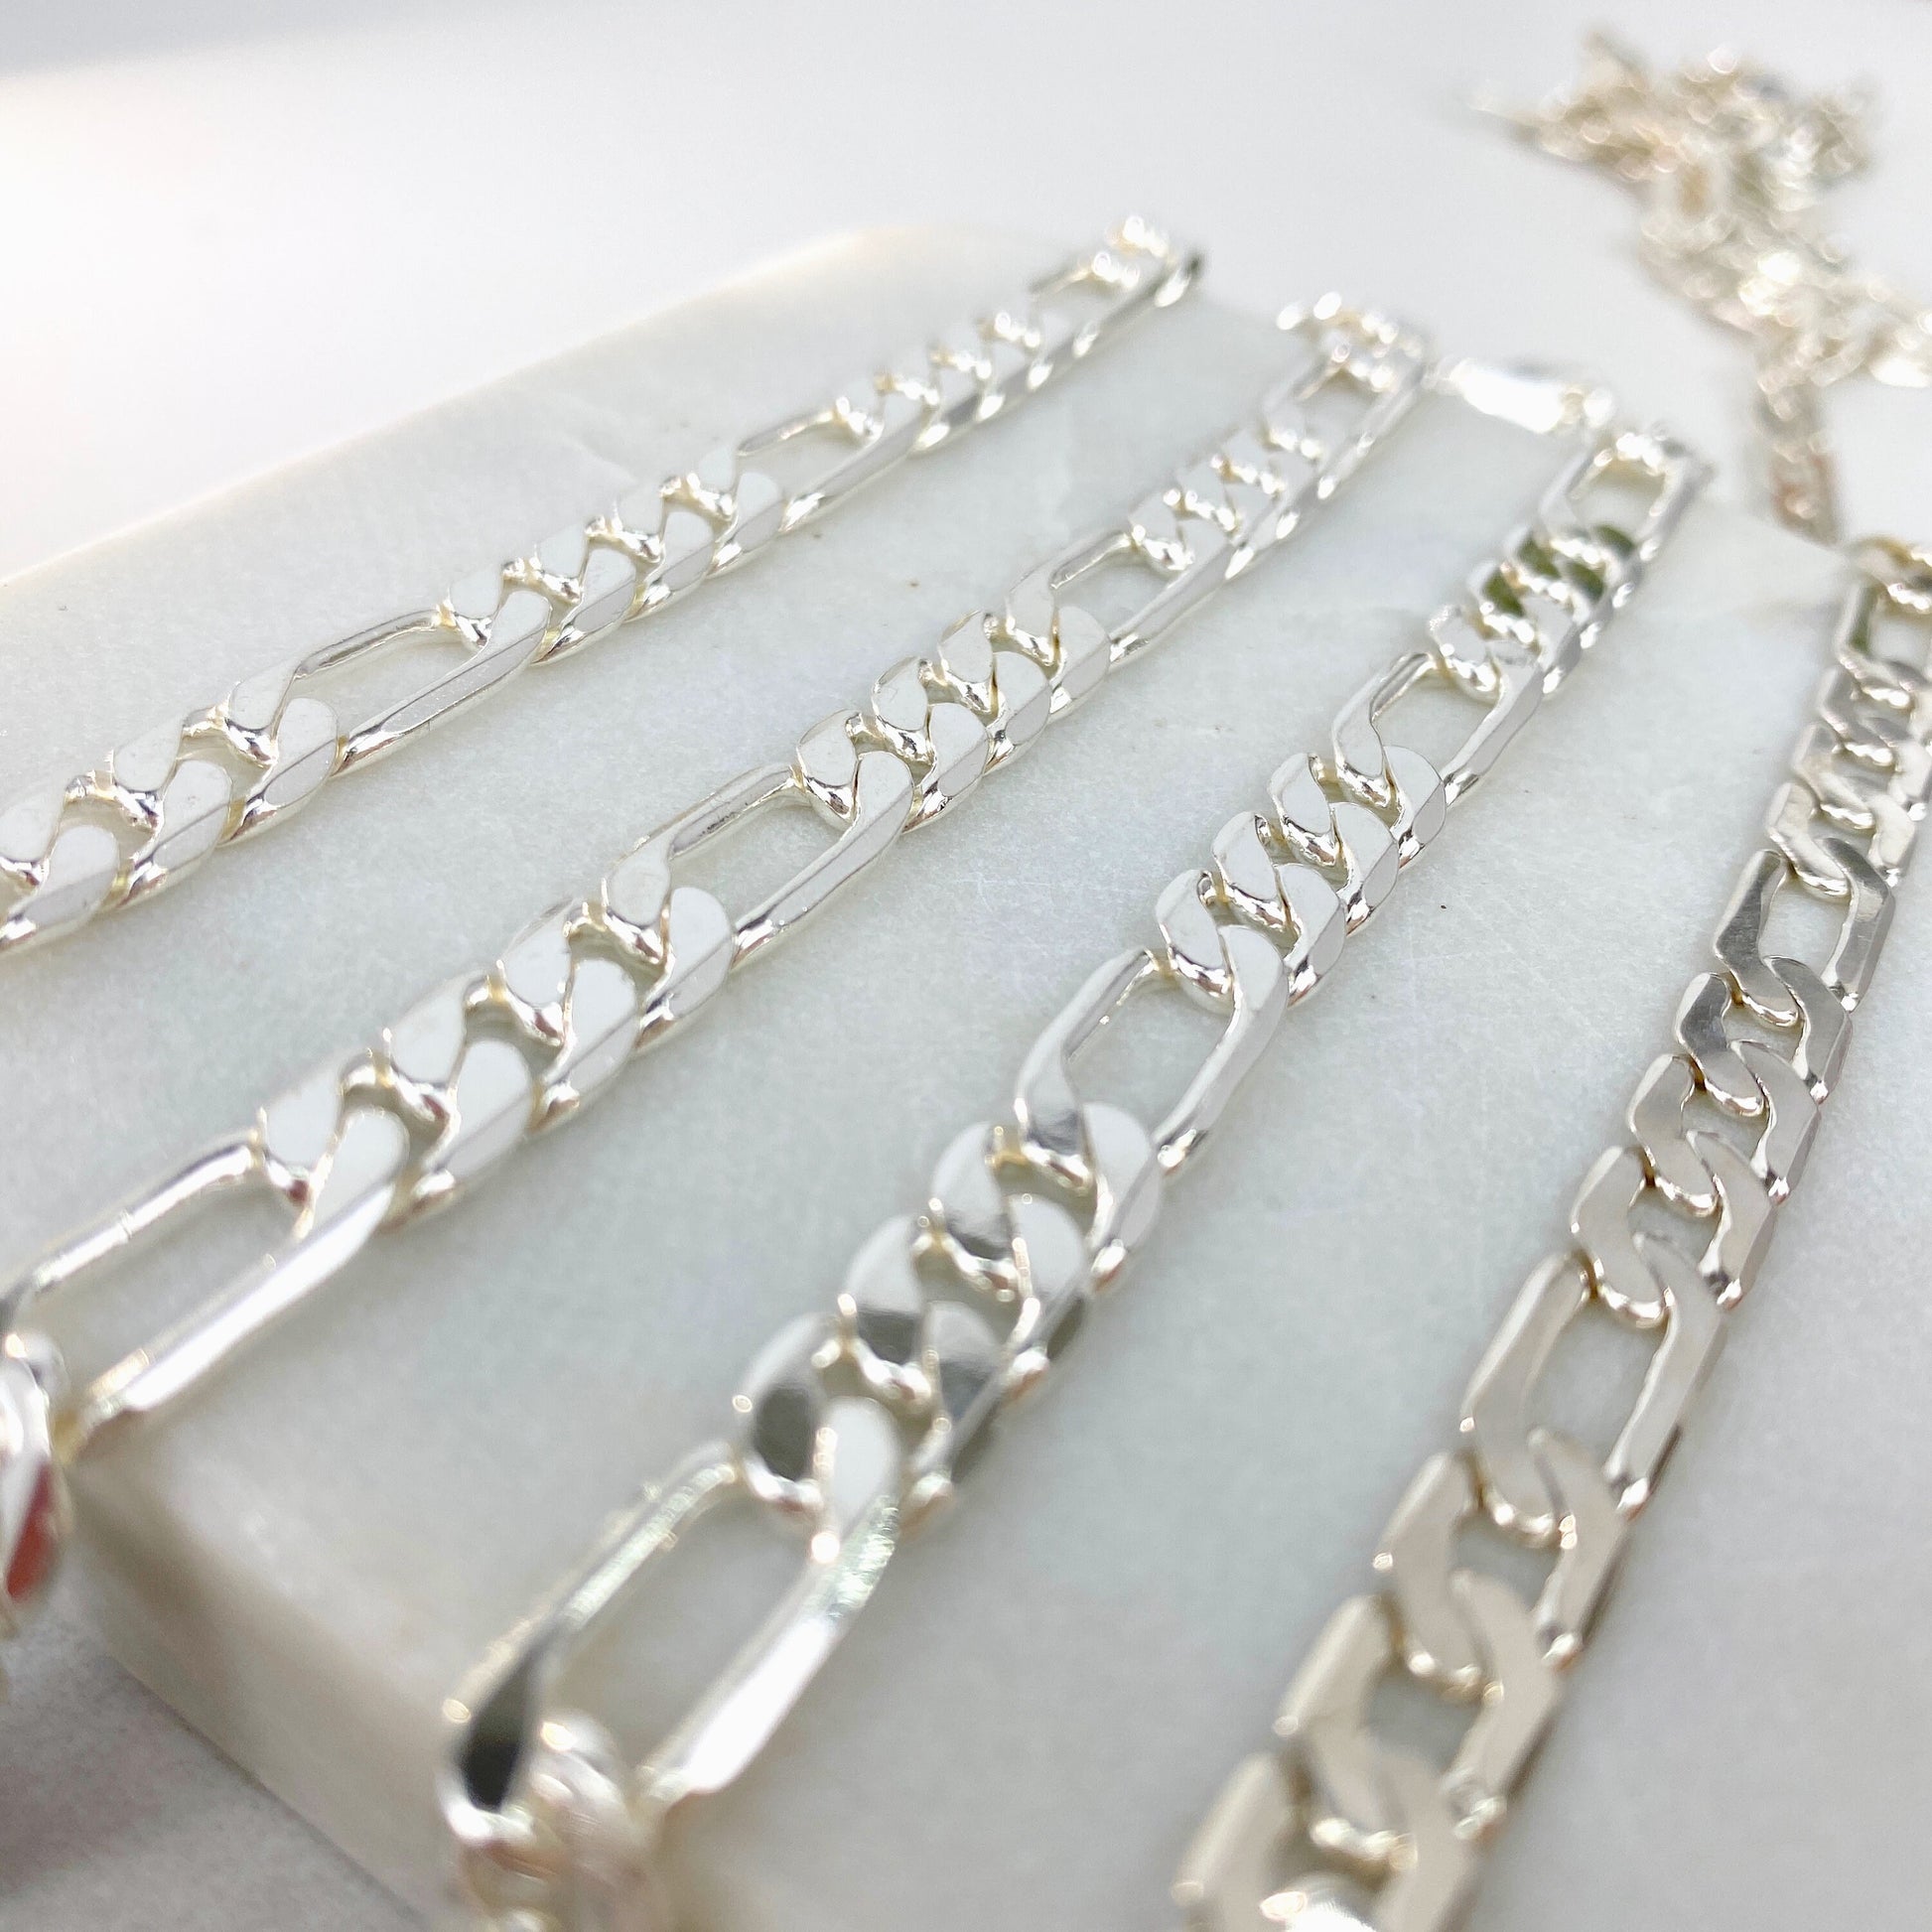 18k White Gold Filled 7.5mm Figaro Link Chain Wholesale Jewelry Supplies